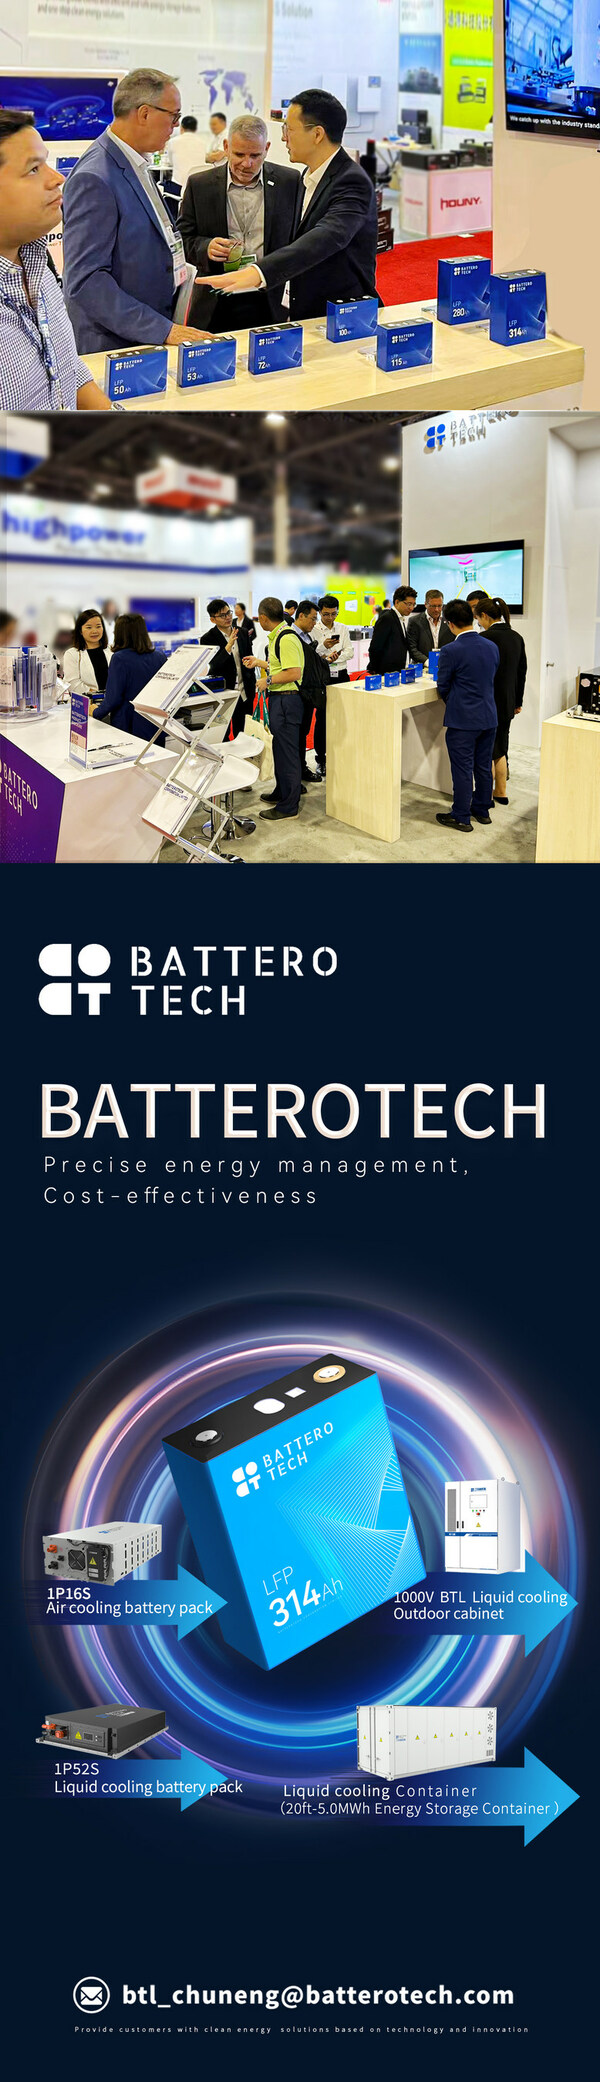 BatteroTech Debuts Advanced 314Ah and 53Ah Battery Technologies at RE+2023, Signaling a New Era for Global Energy Storage